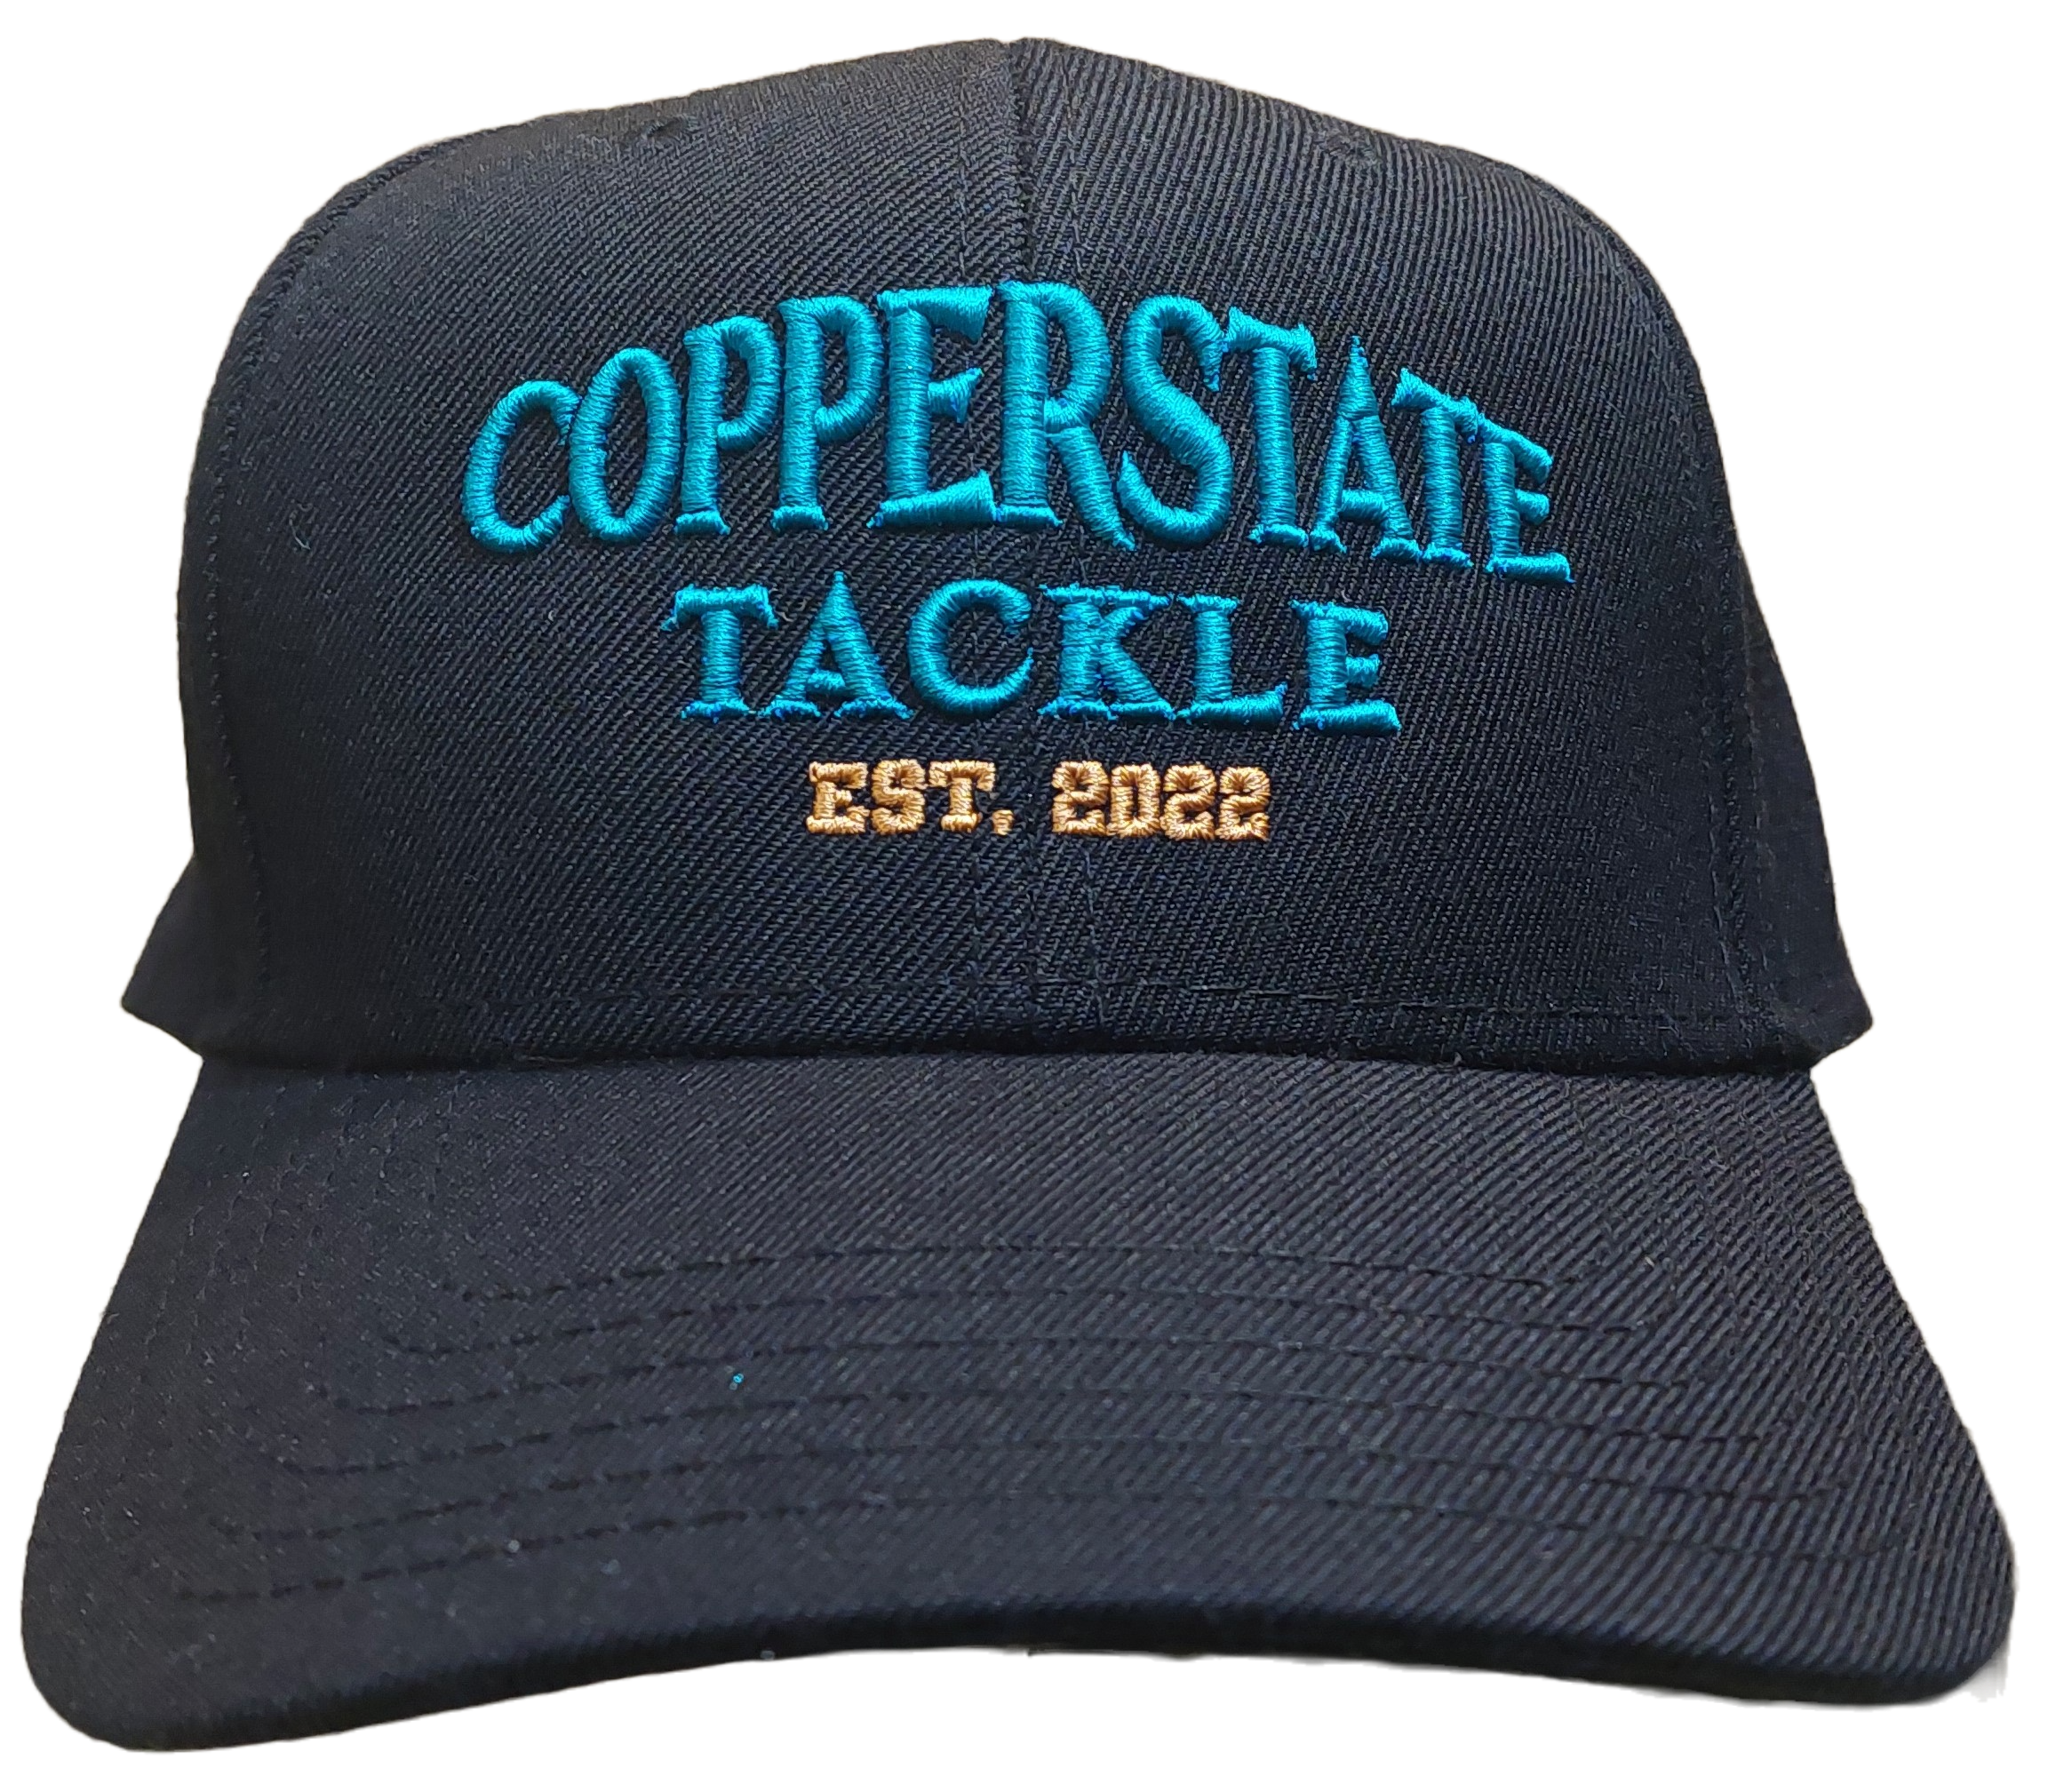 COPPERSTATE TACKLE ICAST ARIZONA EDITION HATS